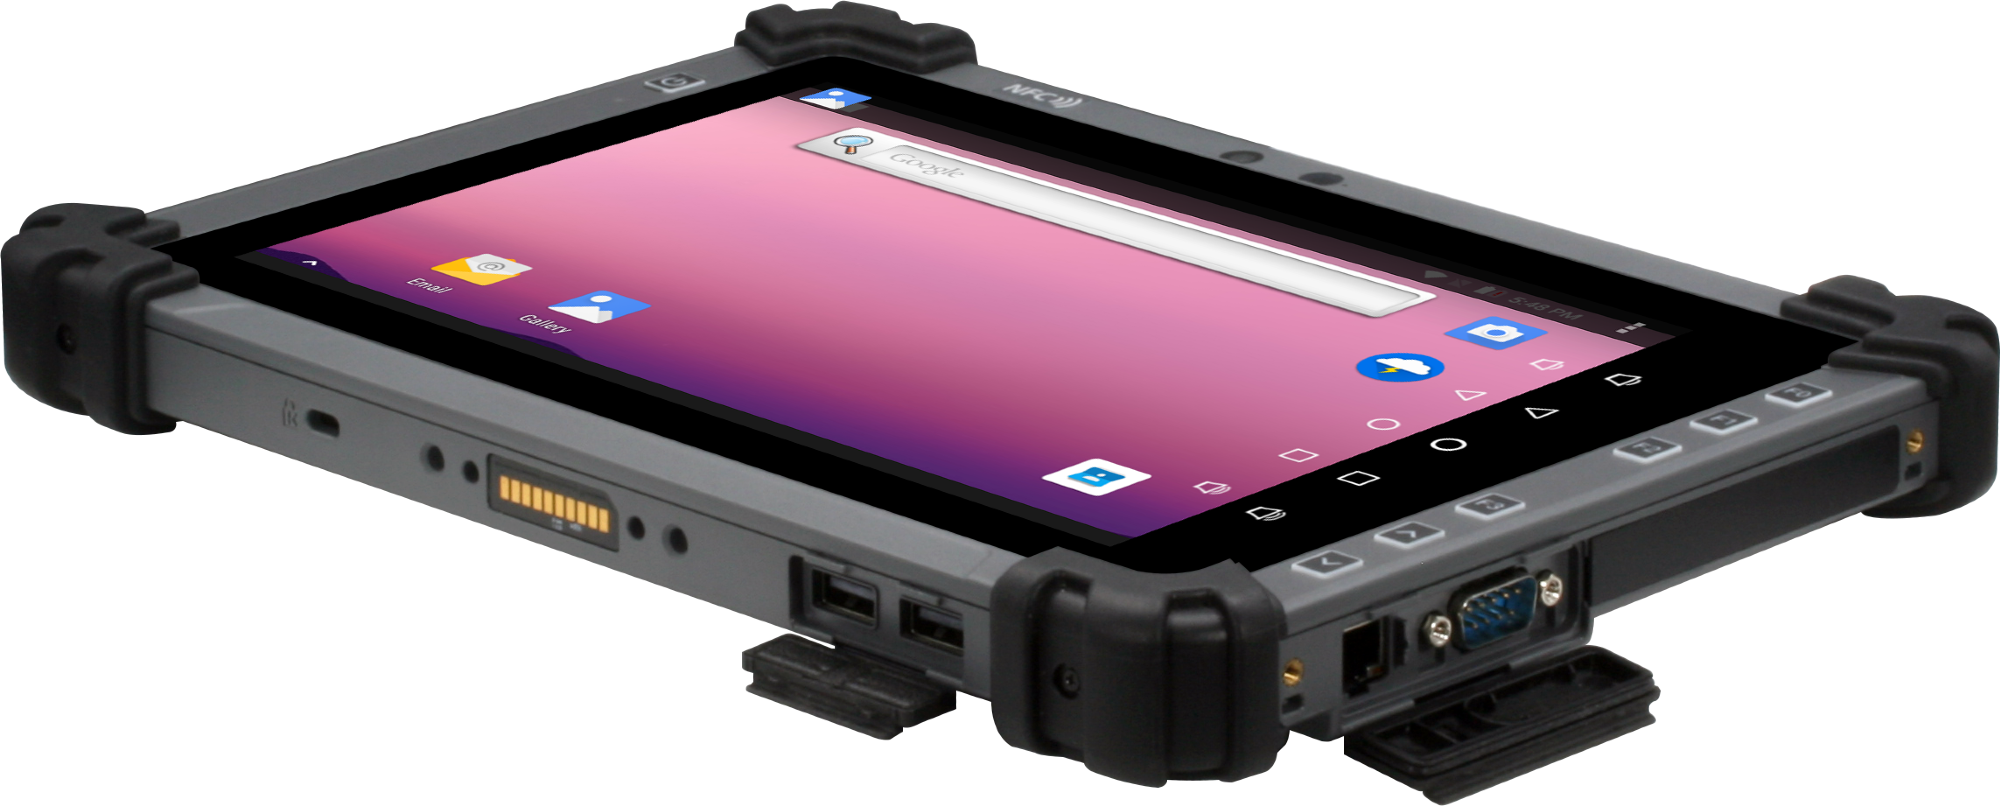 AAEON’s RTC-1010RK Combines the Rockchip RK3399 with Android 11 in a Rugged Mobile Tablet Built for Tough Tasks